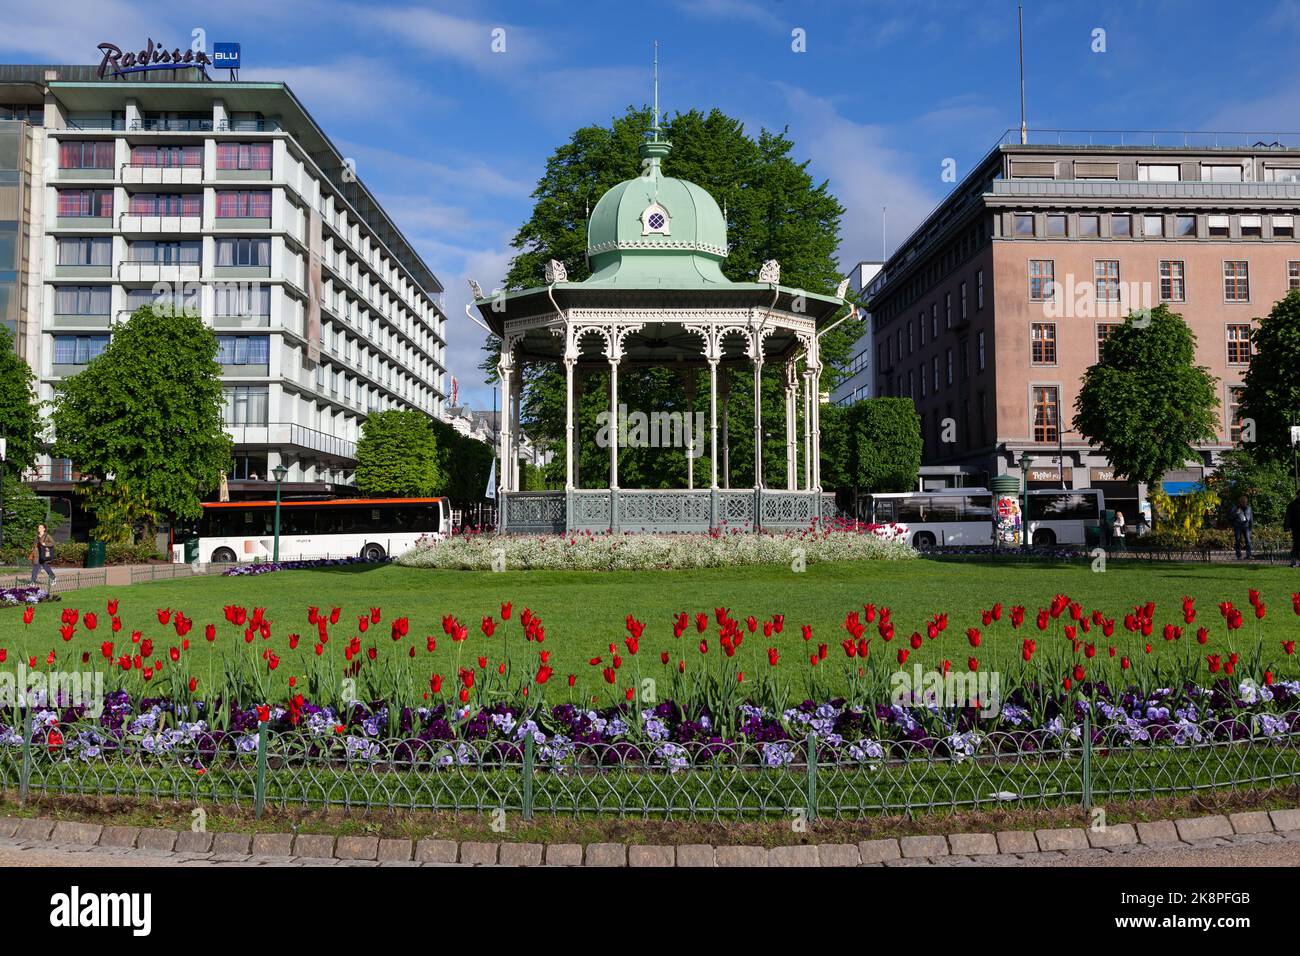 The Gazebo in the Lille Lungegardsvannet lake with the city buildings in the background, Bergen, Norway Stock Photo